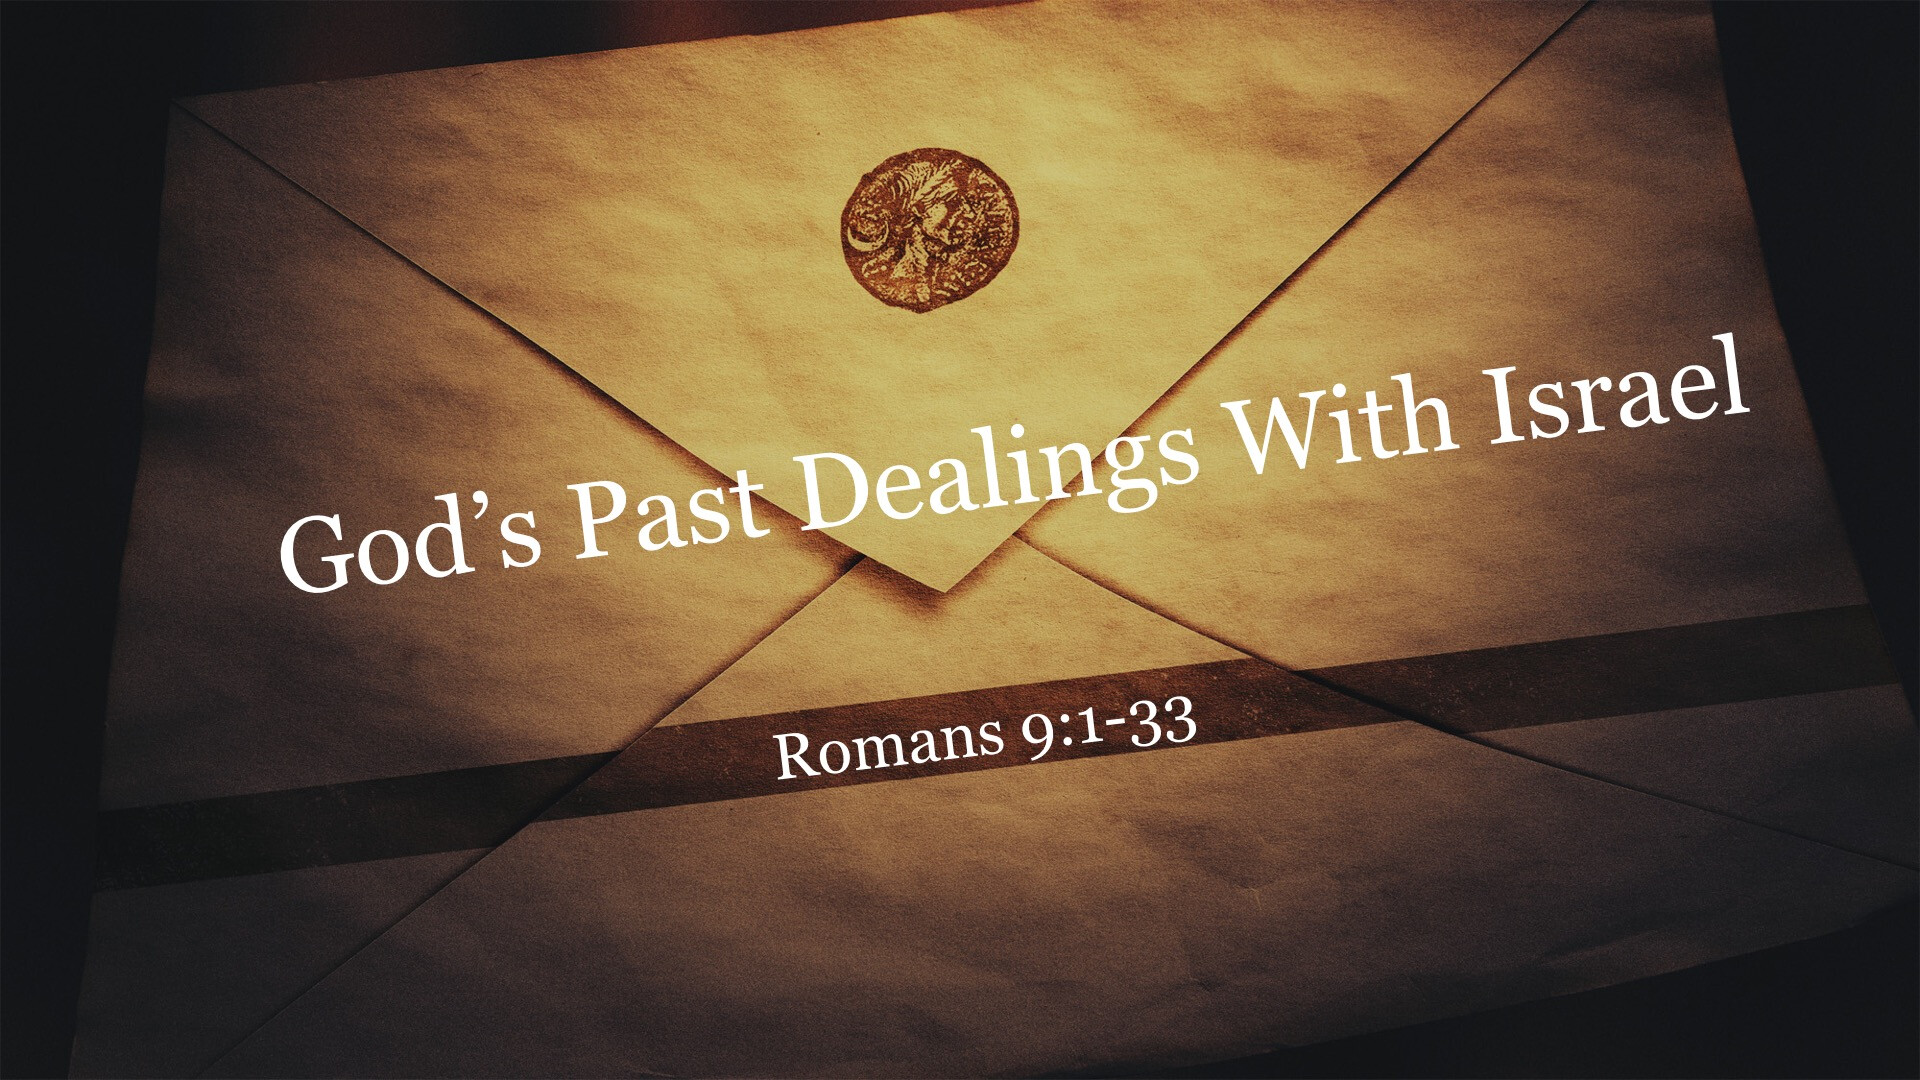 God's Present Dealings with Israel